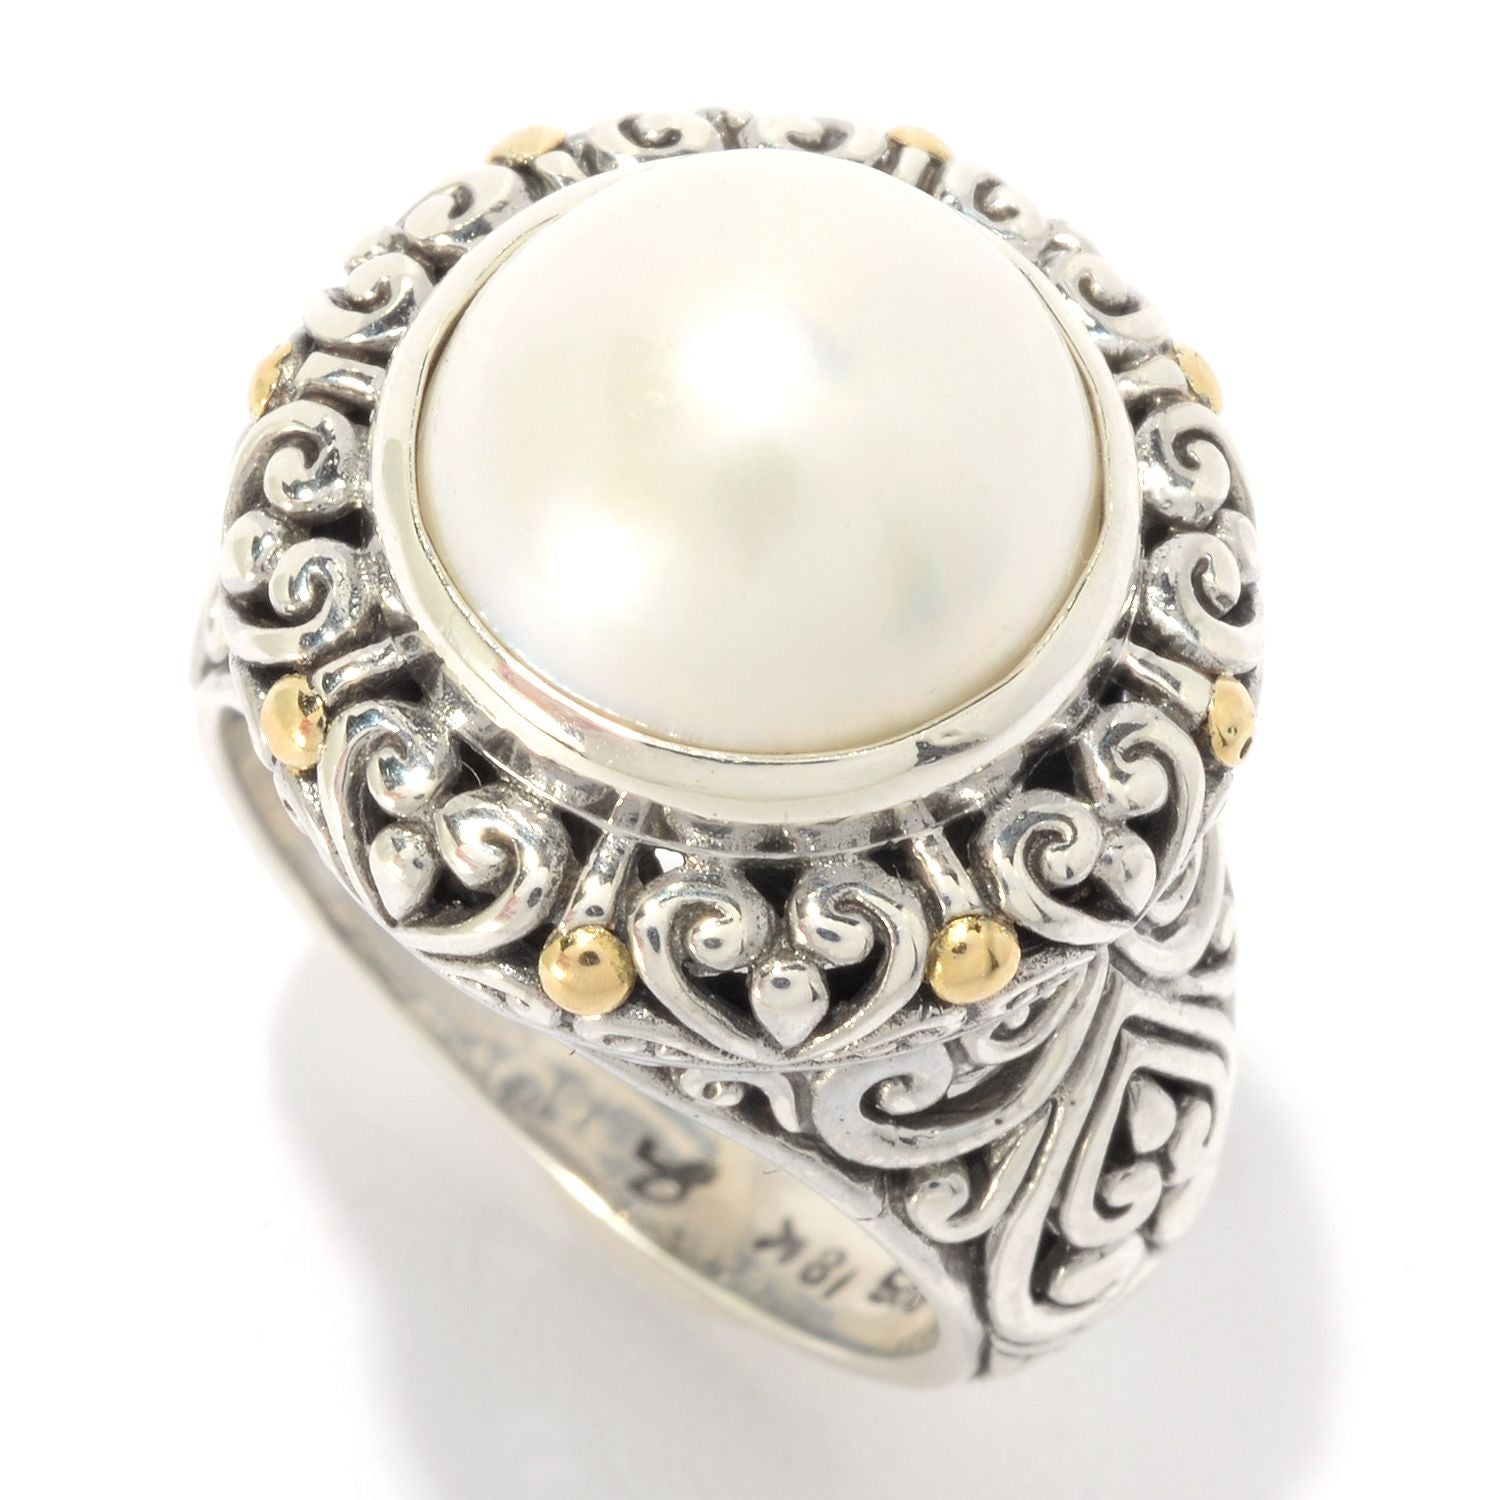 Samuel B. Sterling Silver and 18K Yellow Gold Round White Pearl Ring, Size  7 (91434)